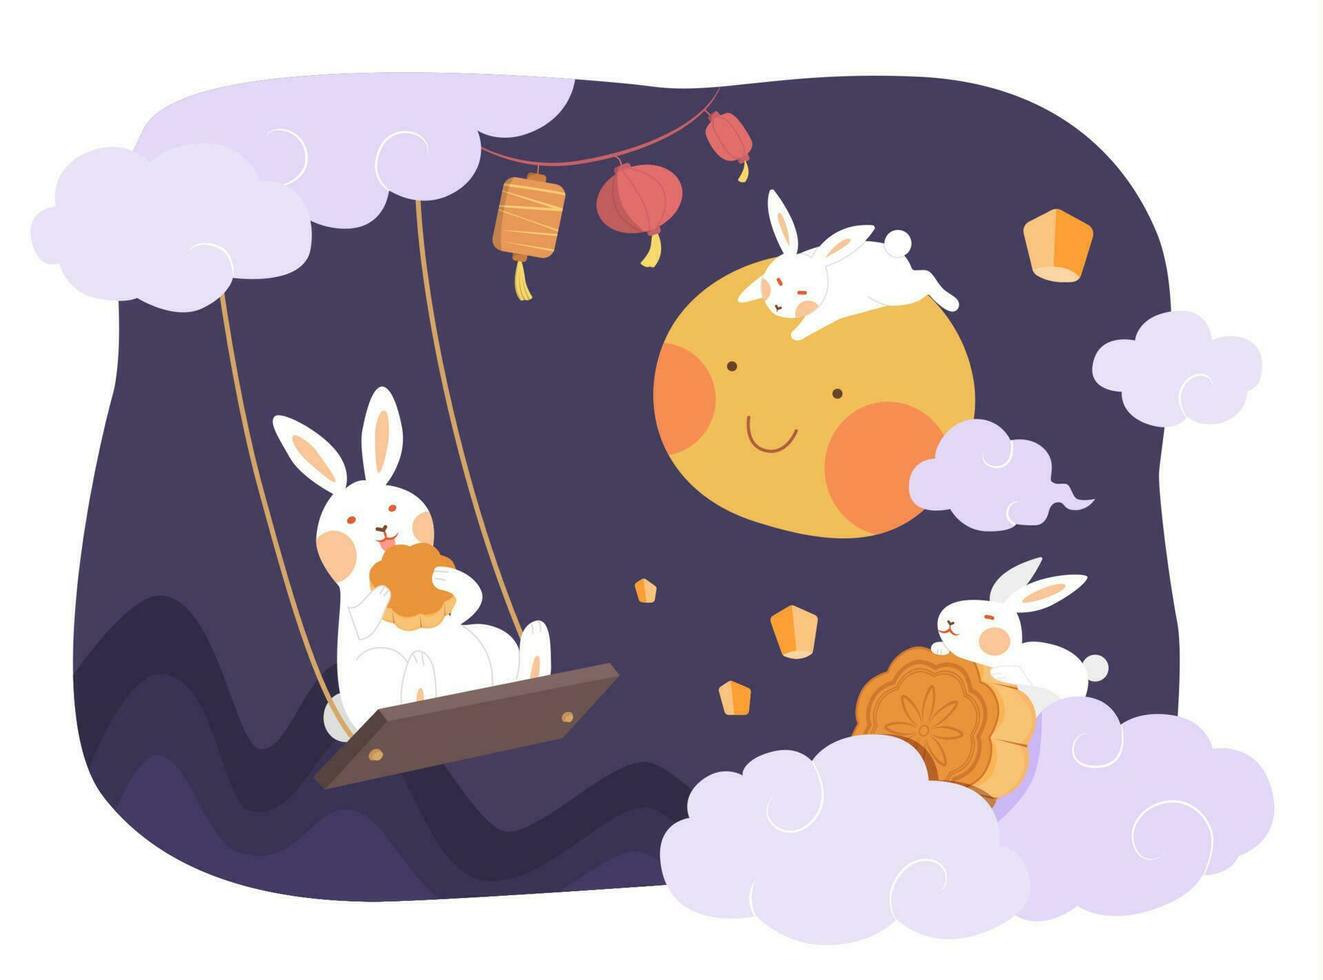 Mid autumn festival design. Flat illustration of rabbits sitting in the sky and watching moon together as holiday celebrations vector